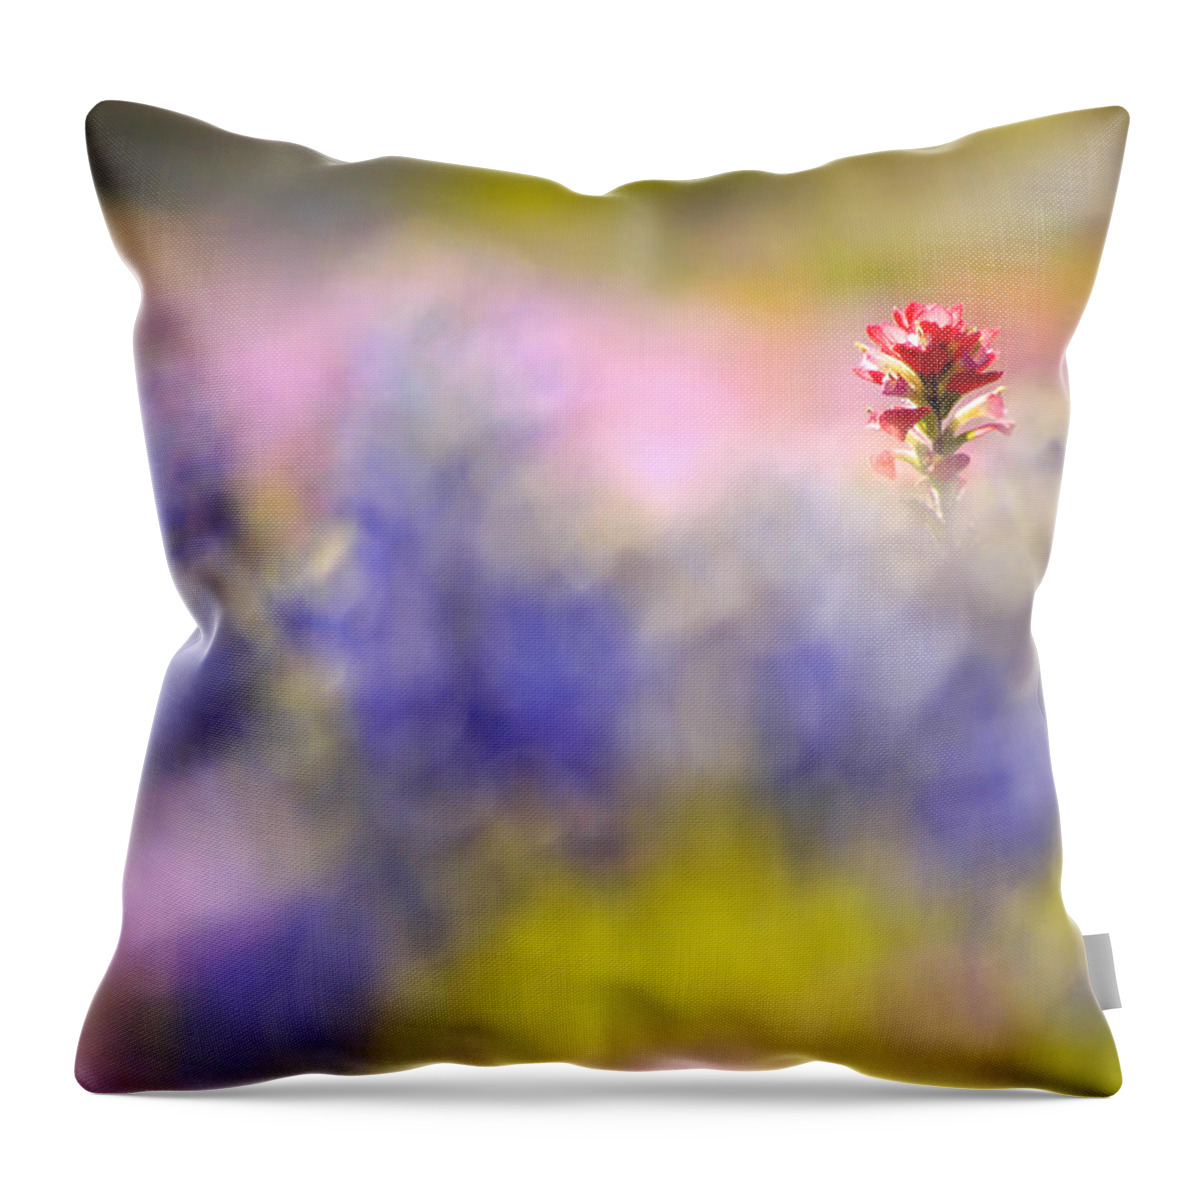 Paintbrush Throw Pillow featuring the photograph Isolated Paintbrush by Ted Keller